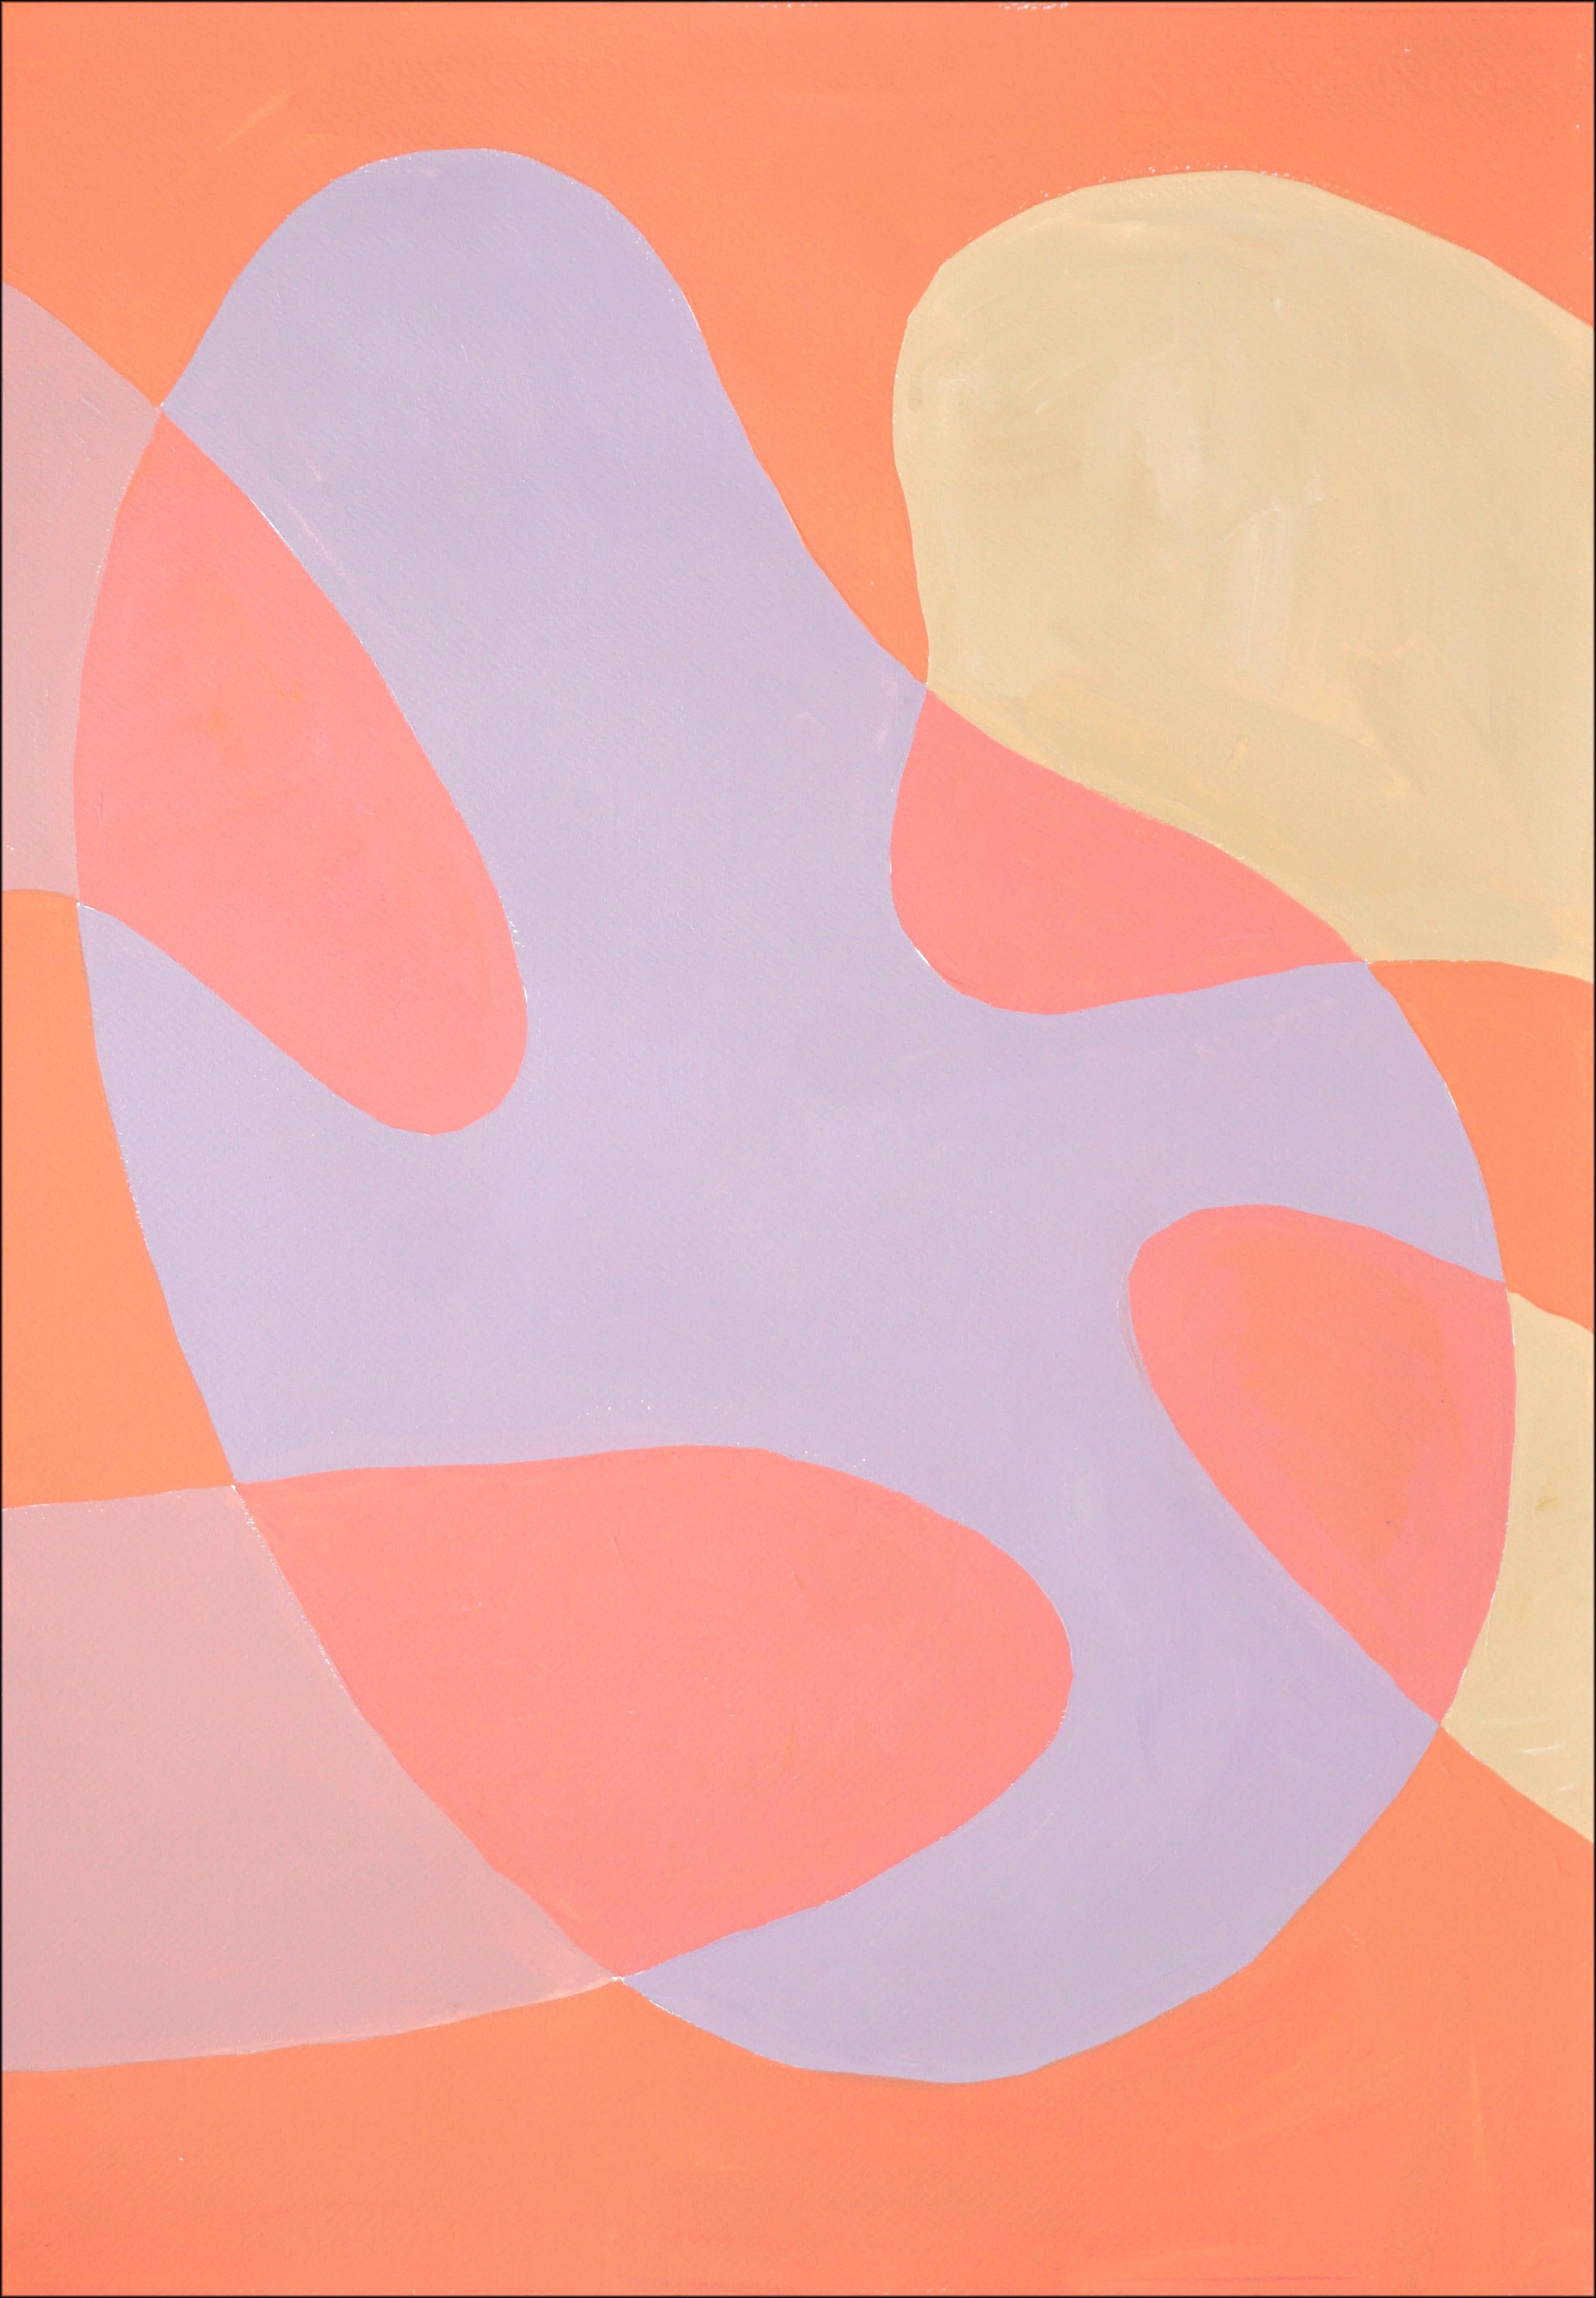 Coral Reef Abstraction, Pastel Tones Triptych Pink and Mauve, Post-Modern Shapes 1